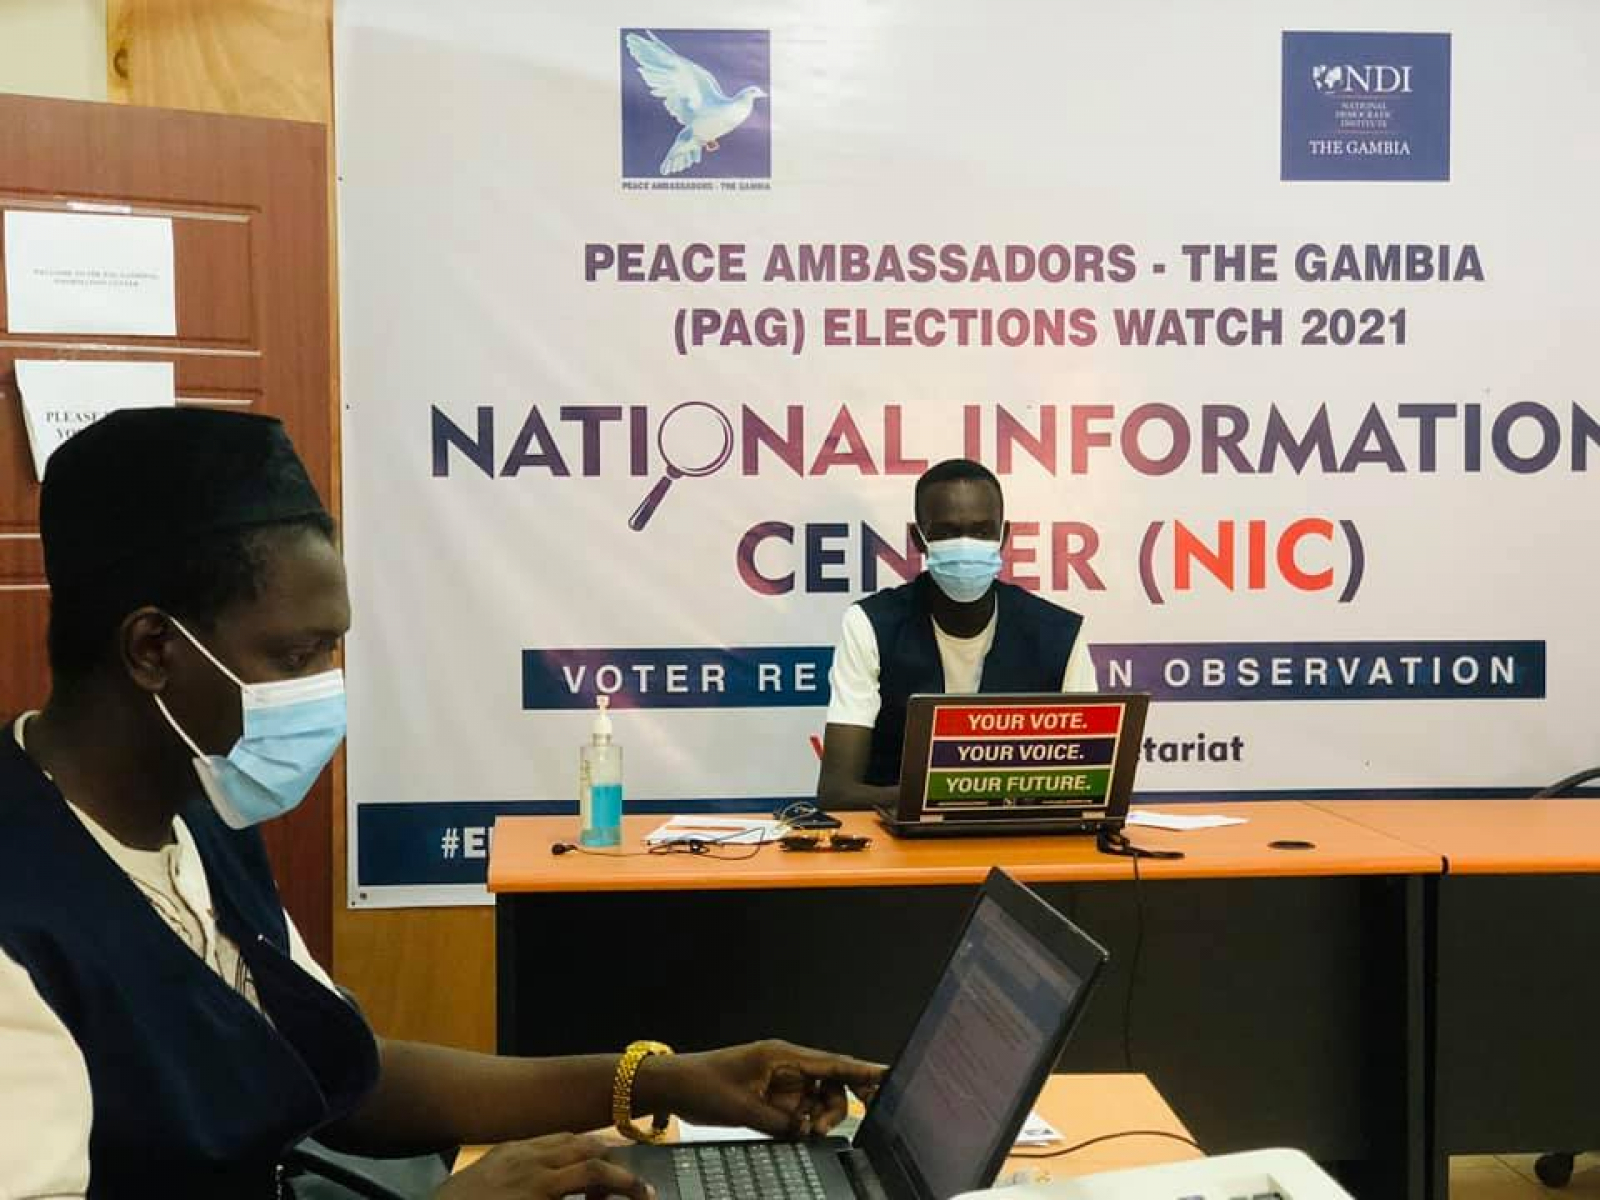 Peace Ambassadors - The Gambia Completes First of its Kind Observation of Voter Registration